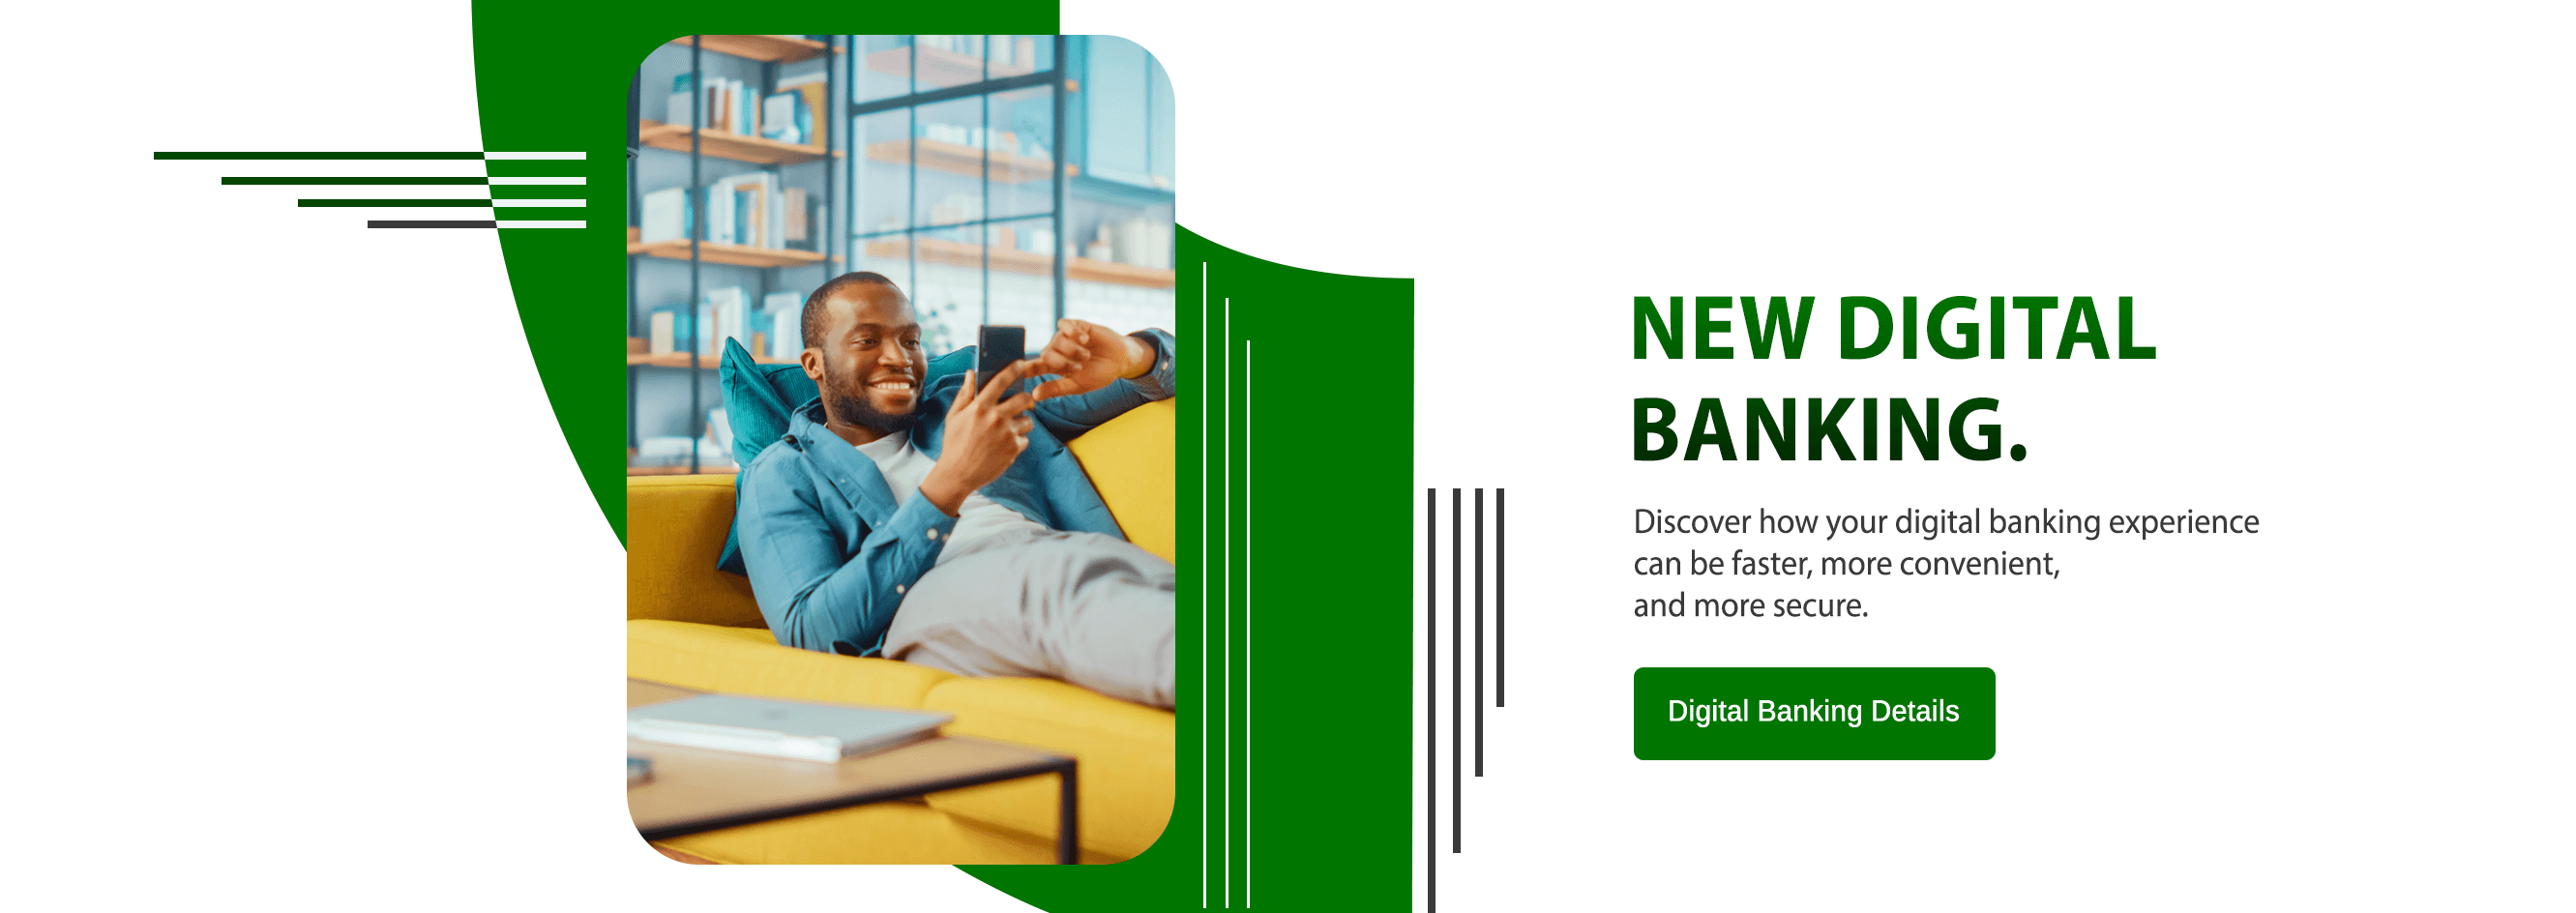 New Digital Banking. Your digital banking experience will be faster, more convenient, and more secure. Digital Banking Details